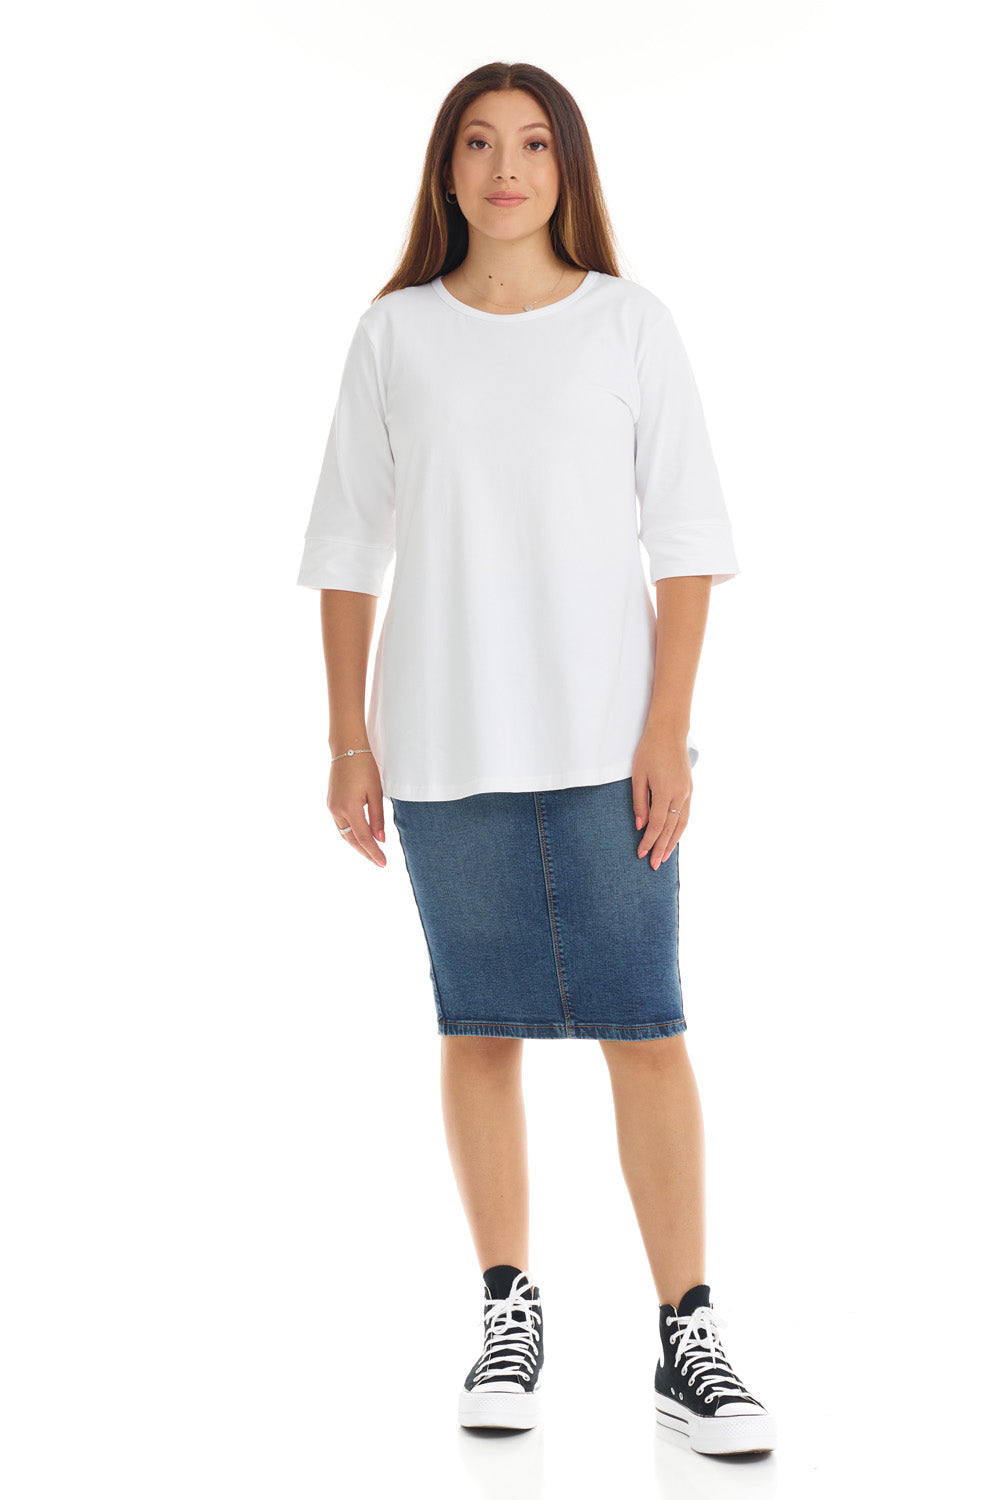 white crew neck top for women with cuff sleeve